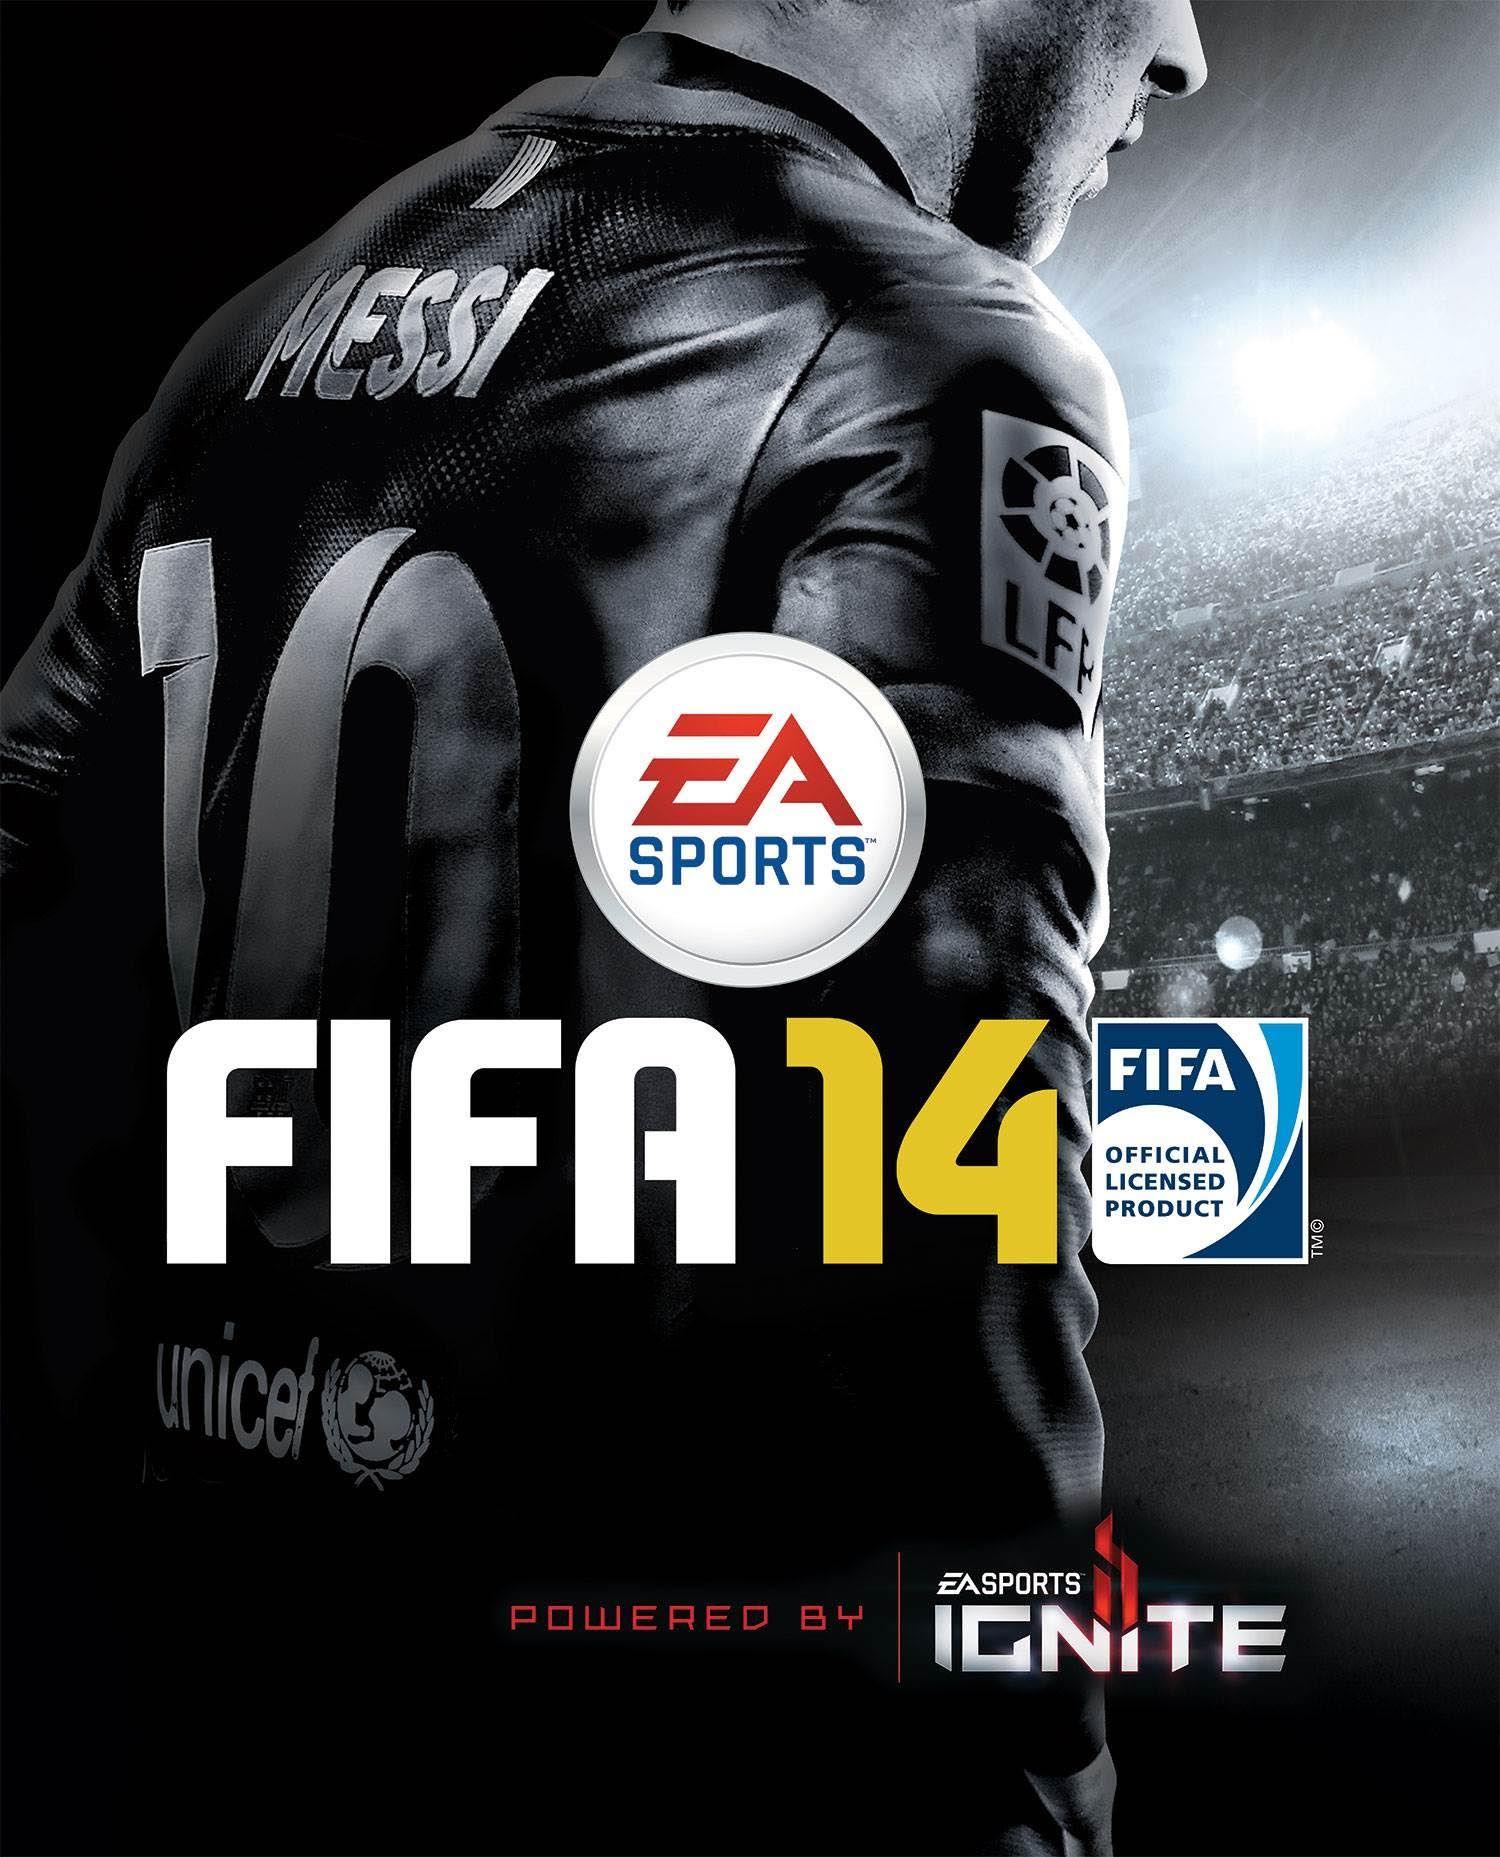 Wallpaper and High Resolution FIFA 14 Image